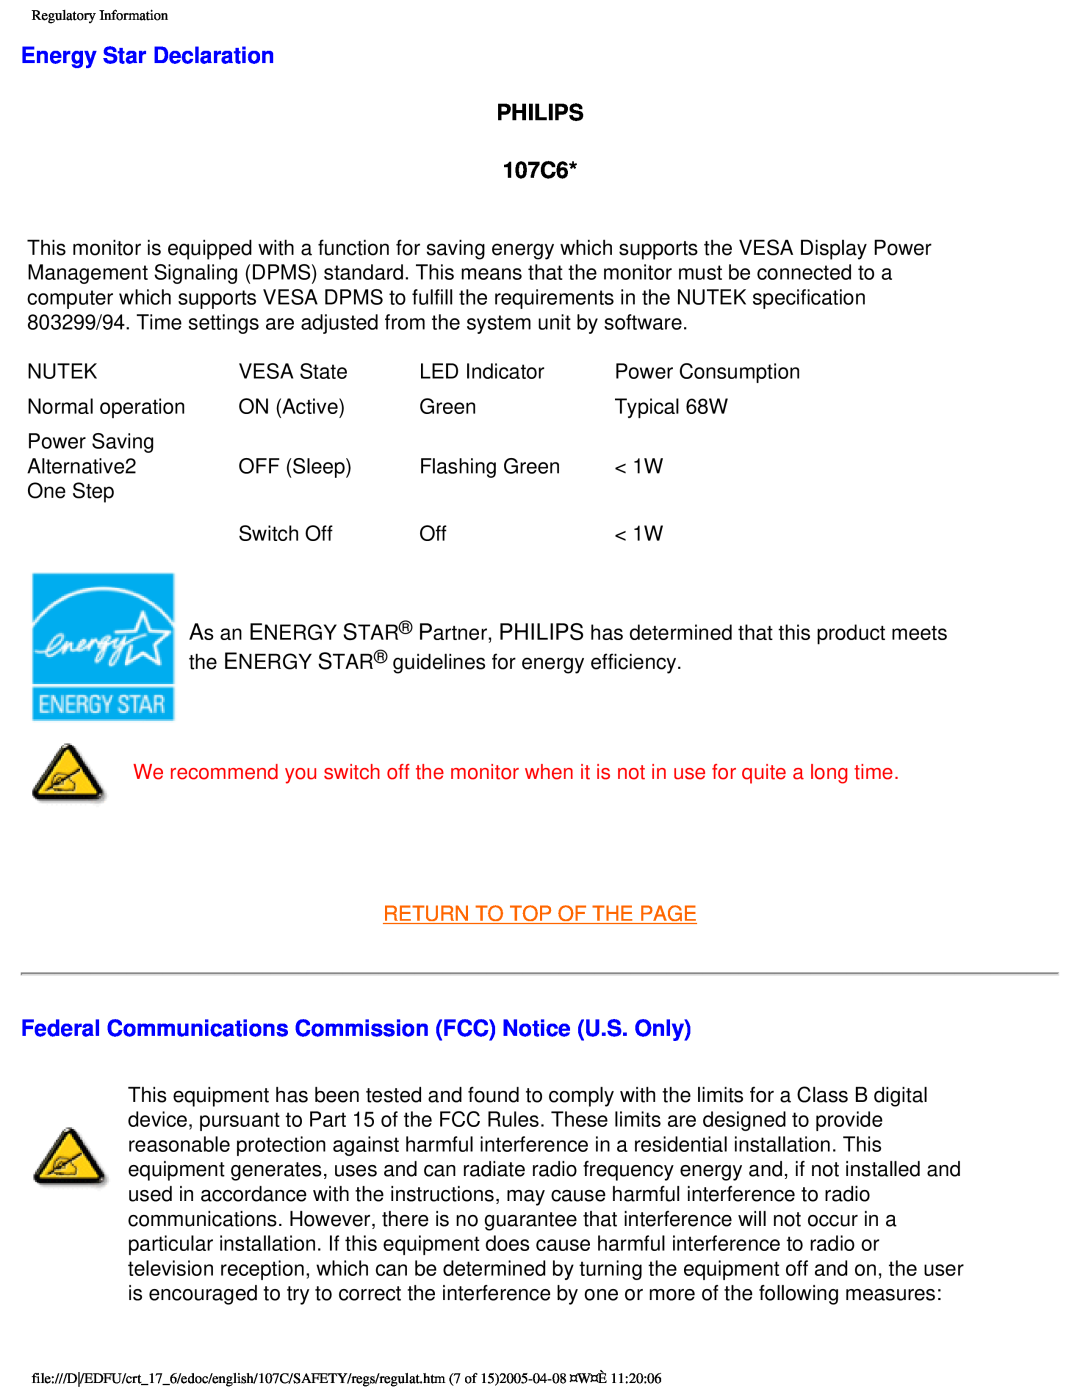 Philips 107C65 user manual Energy Star Declaration, PHILIPS 107C6, Return To Top Of The Page 